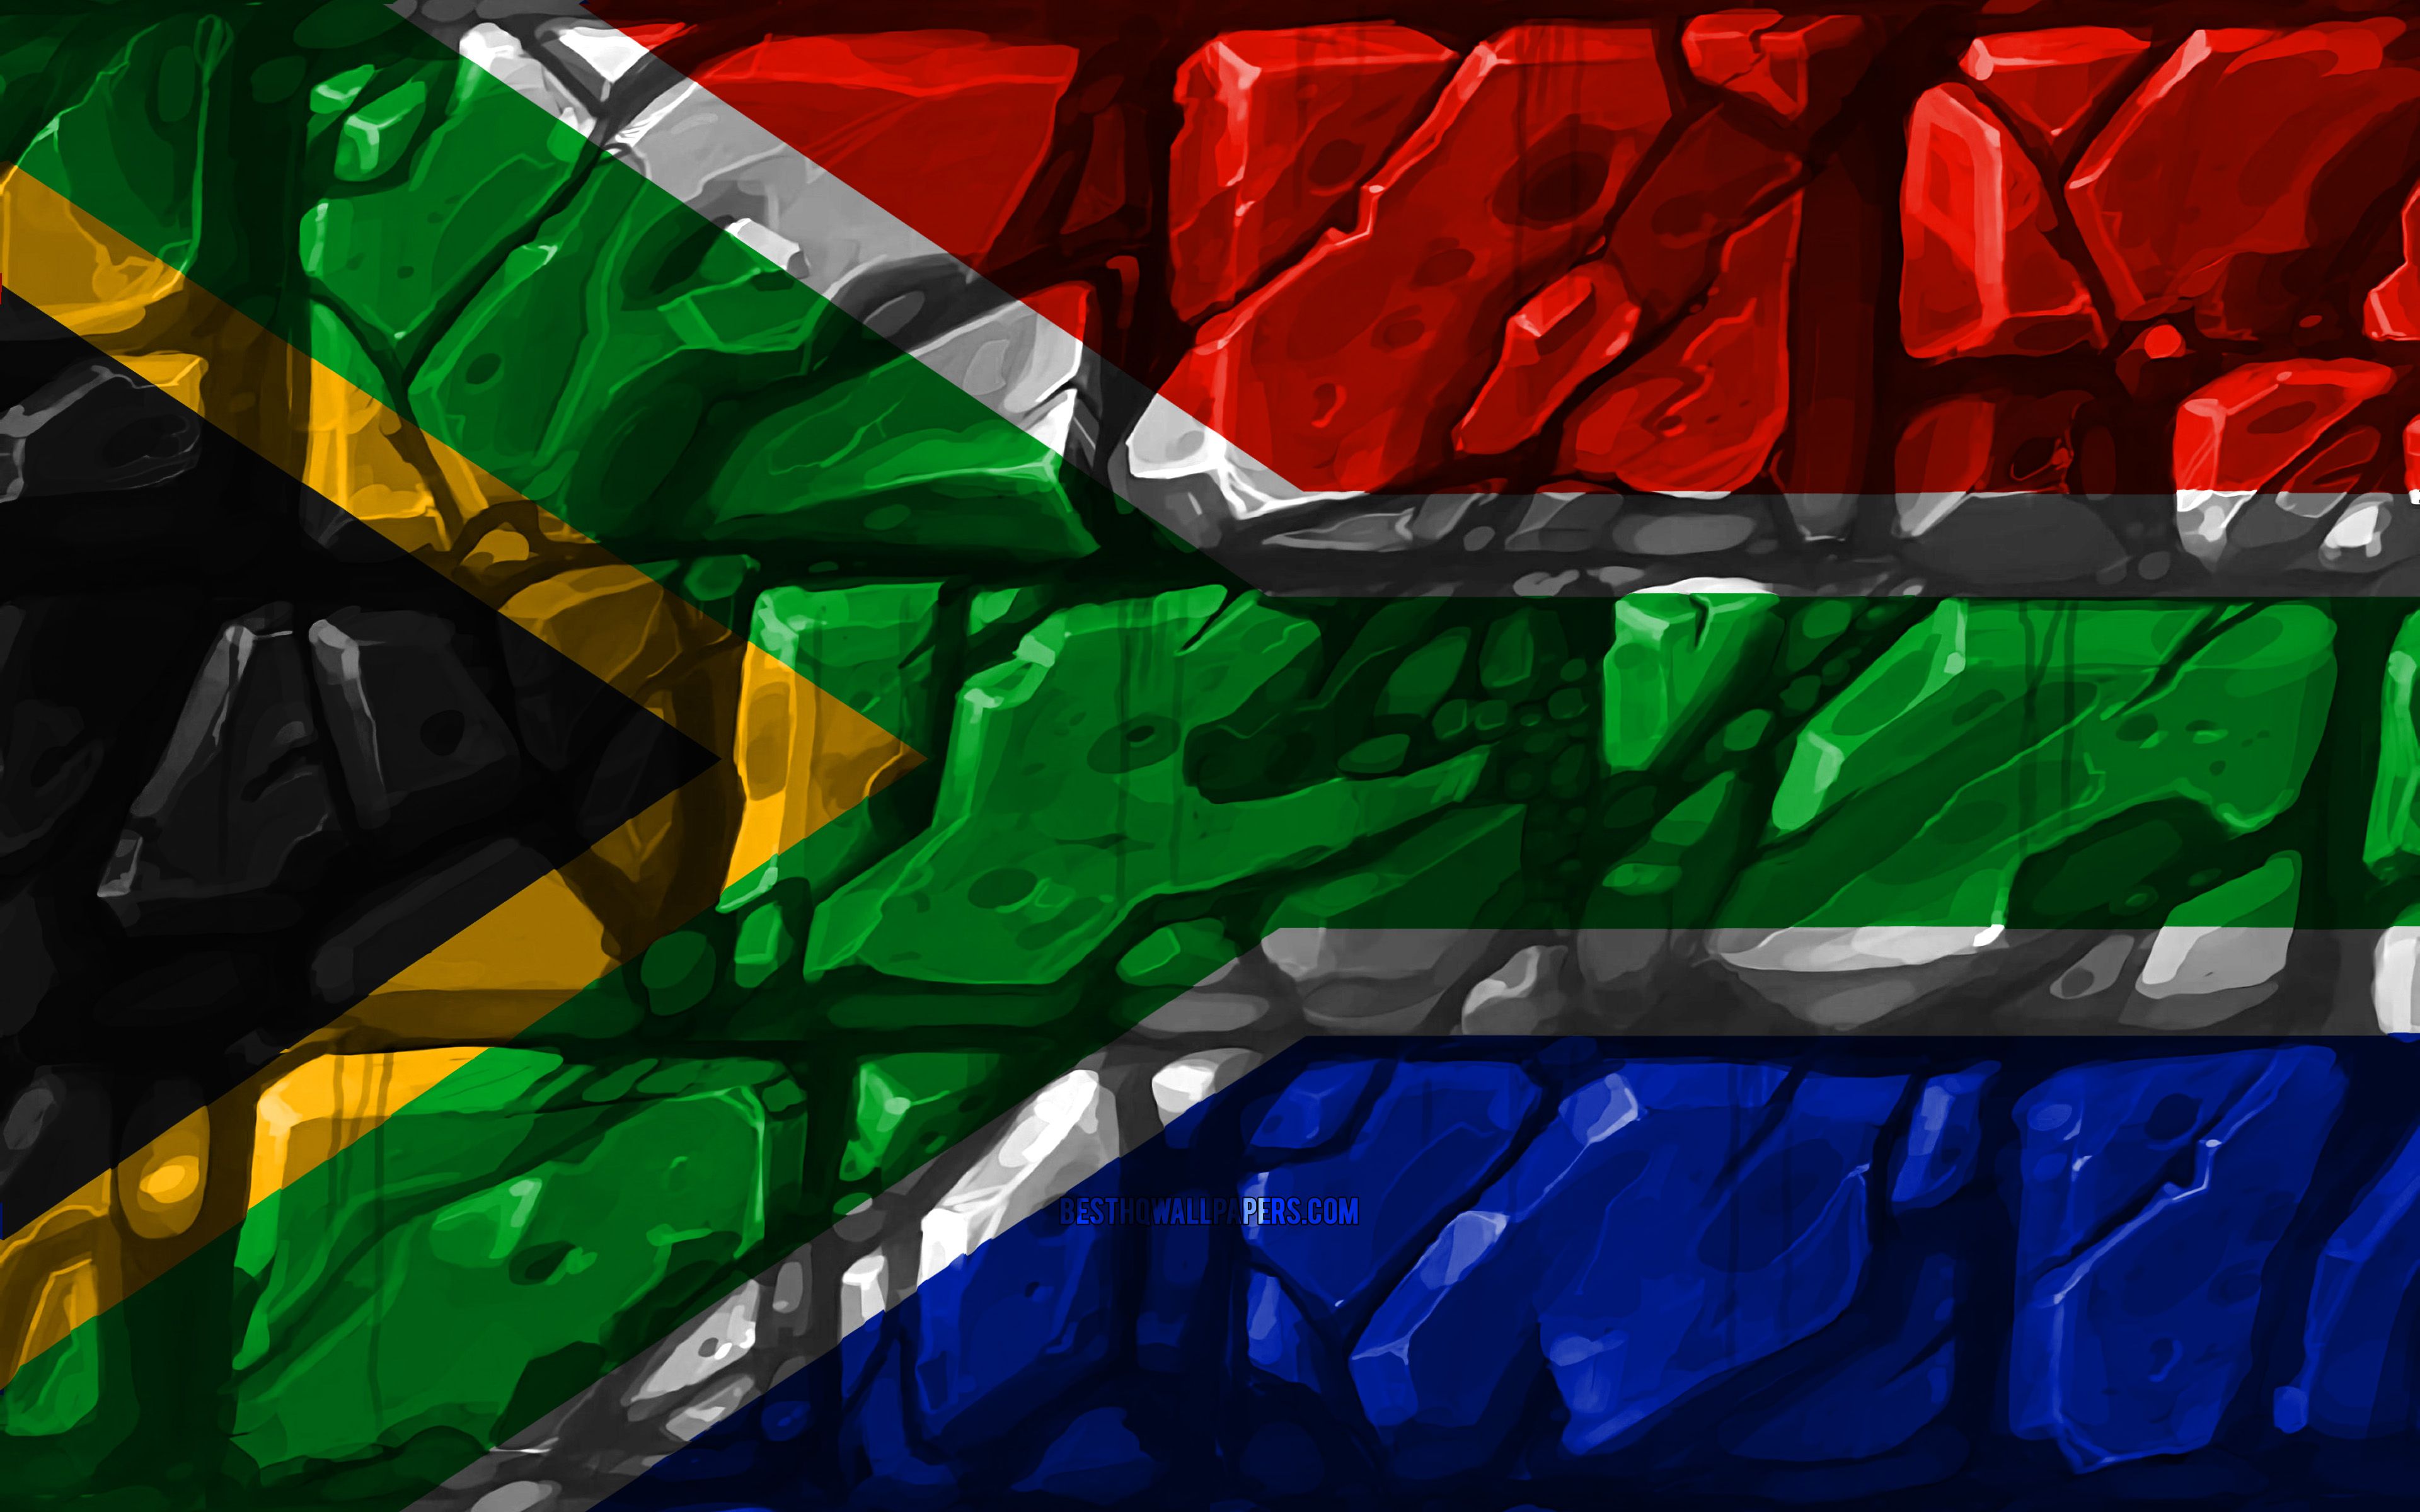 Download wallpaper South African flag, brickwall, 4k, African countries, national symbols, Flag of South Africa, creative, South Africa, Africa, South Africa 3D flag for desktop with resolution 3840x2400. High Quality HD picture